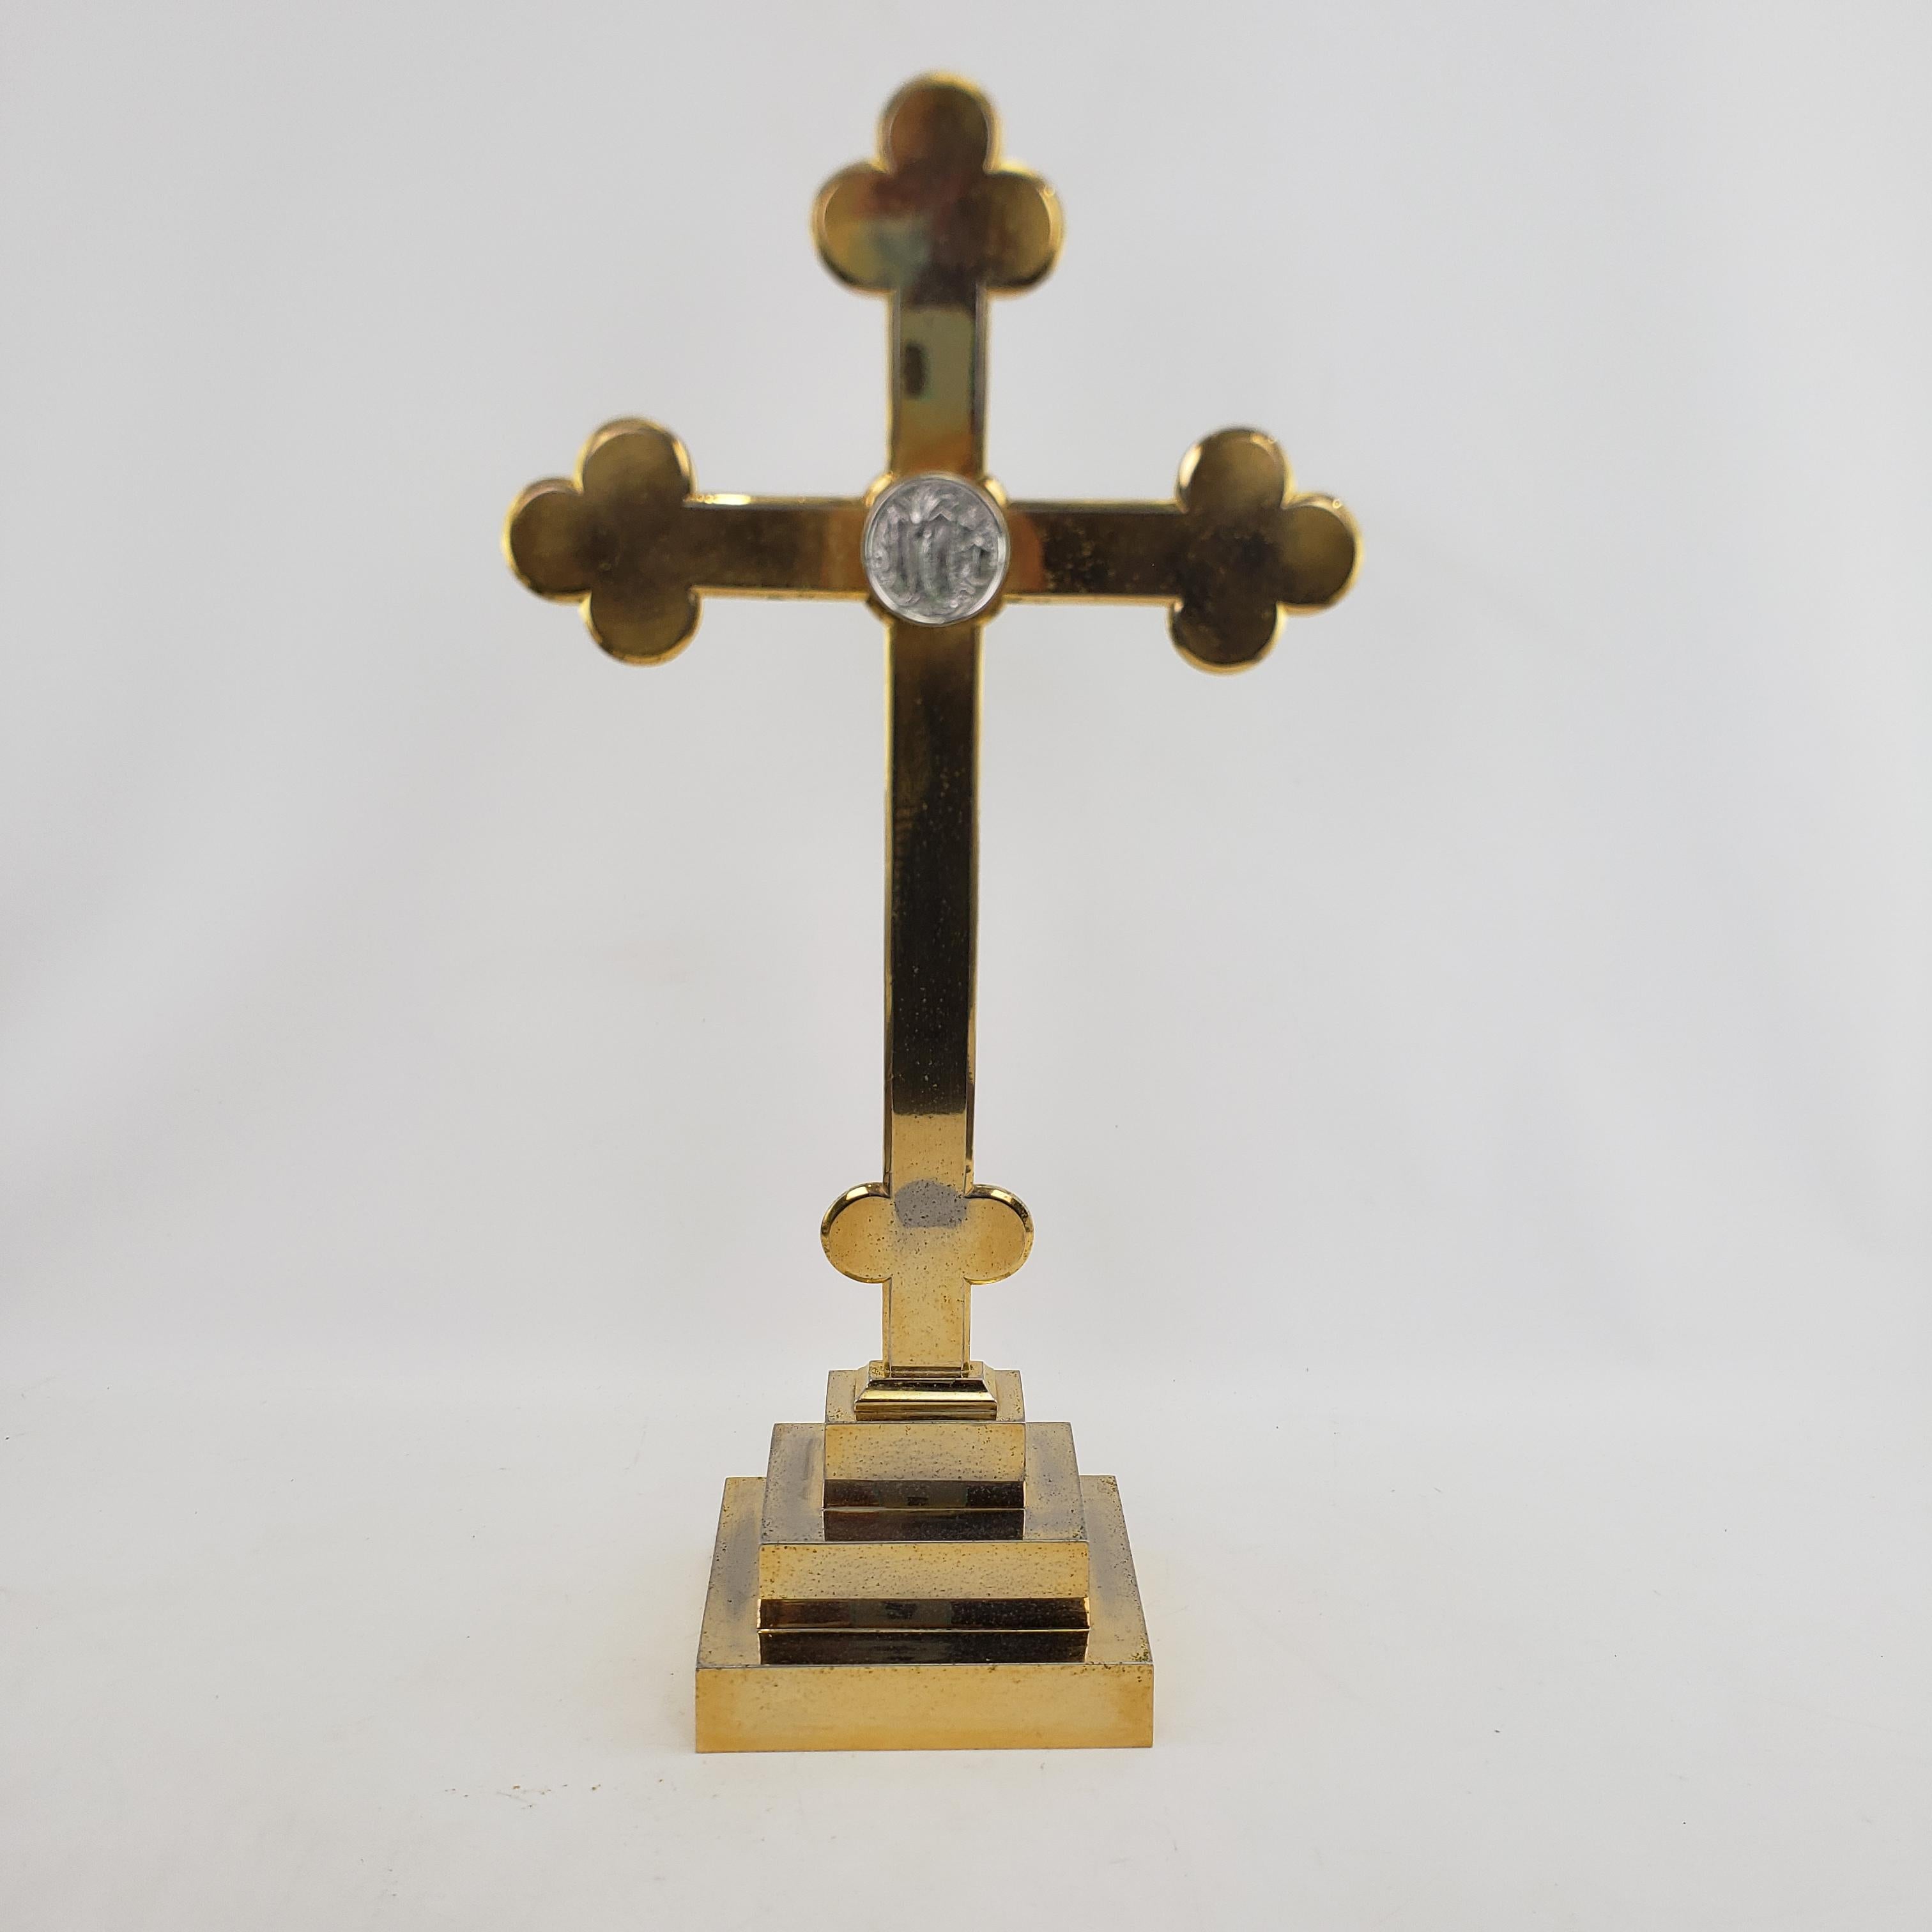 This large brass plated cross is unsigned, but presumed to have originated from Italy and dating to approximately 1970 and done in the period Mid-Century style. The cross is composed of a brass plated steel with a stepped base. Please note this is a